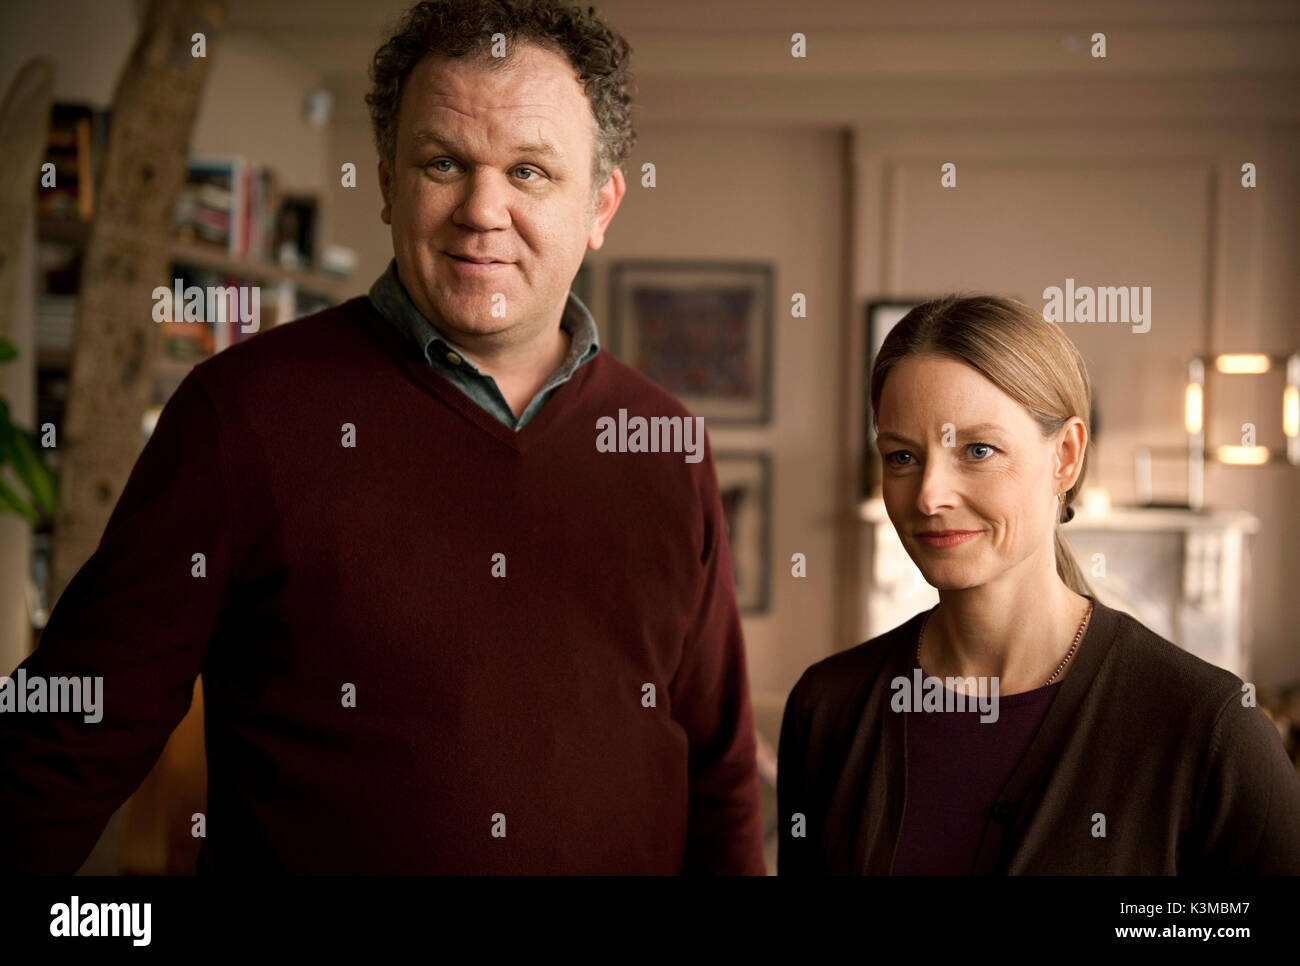 CARNAGE [FR / GER / POL / SP 2011] [L-R] JOHN C. REILLY, JODIE FOSTER     Date: 2011 Stock Photo